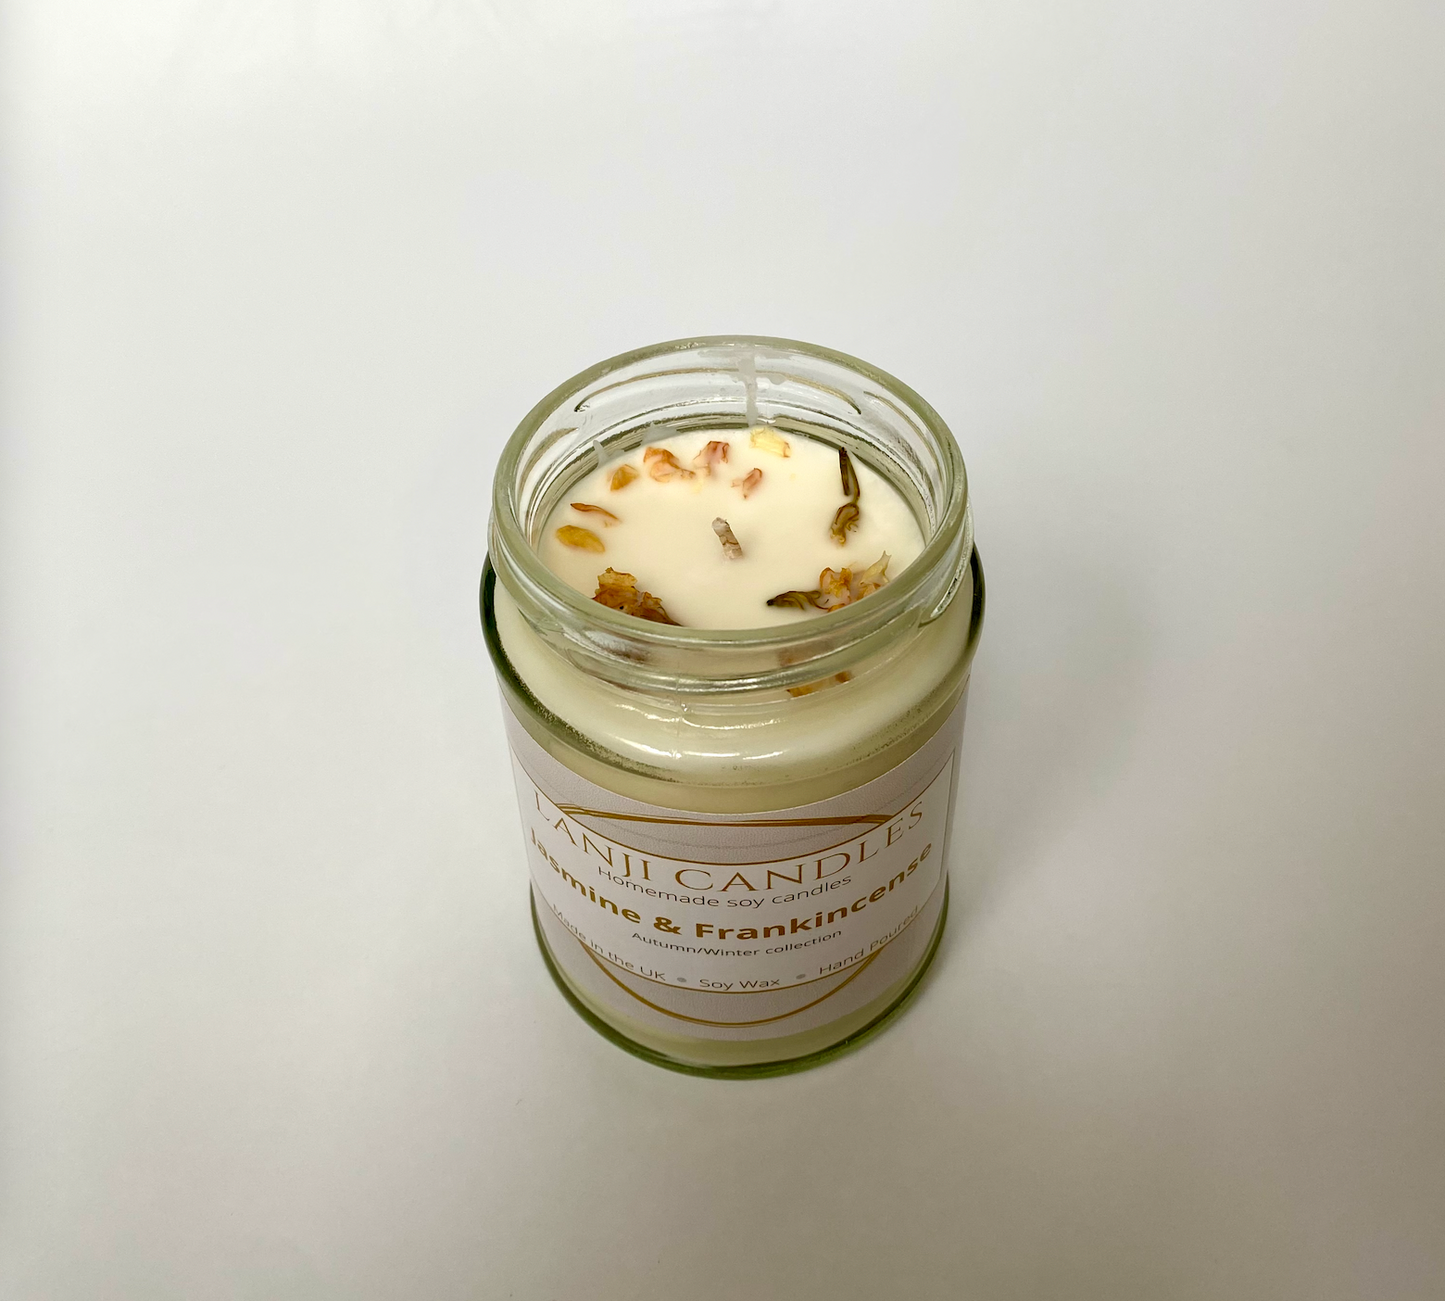 Jasmine & Frankincense Scented Soy Wax Candle